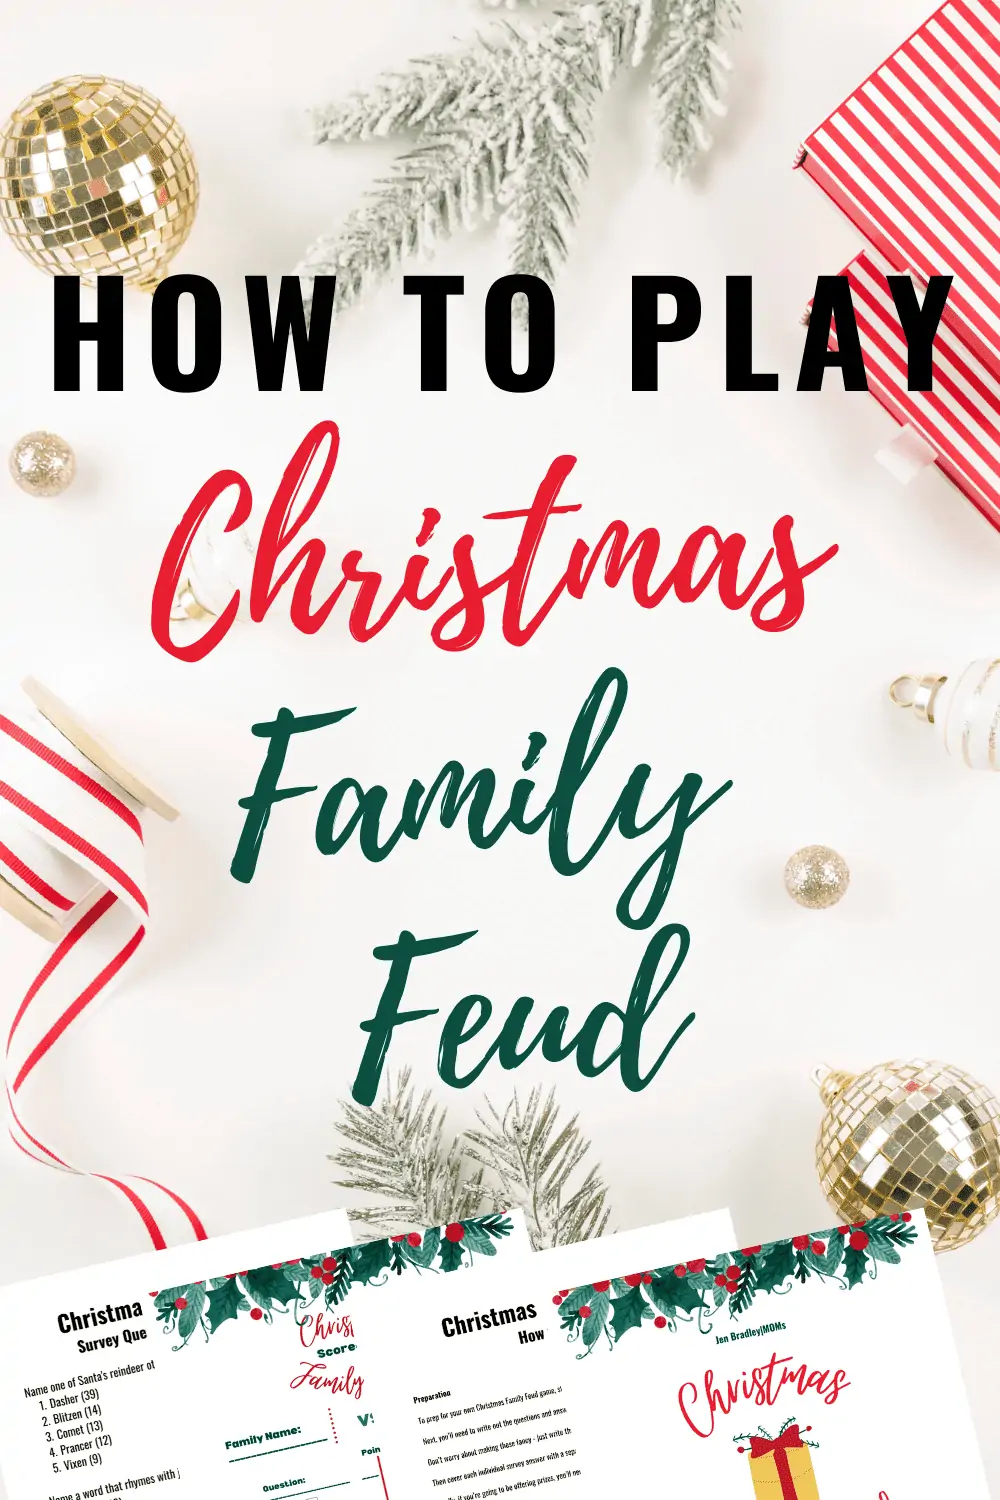 Fun Christmas Family Feud Game for the Whole Family